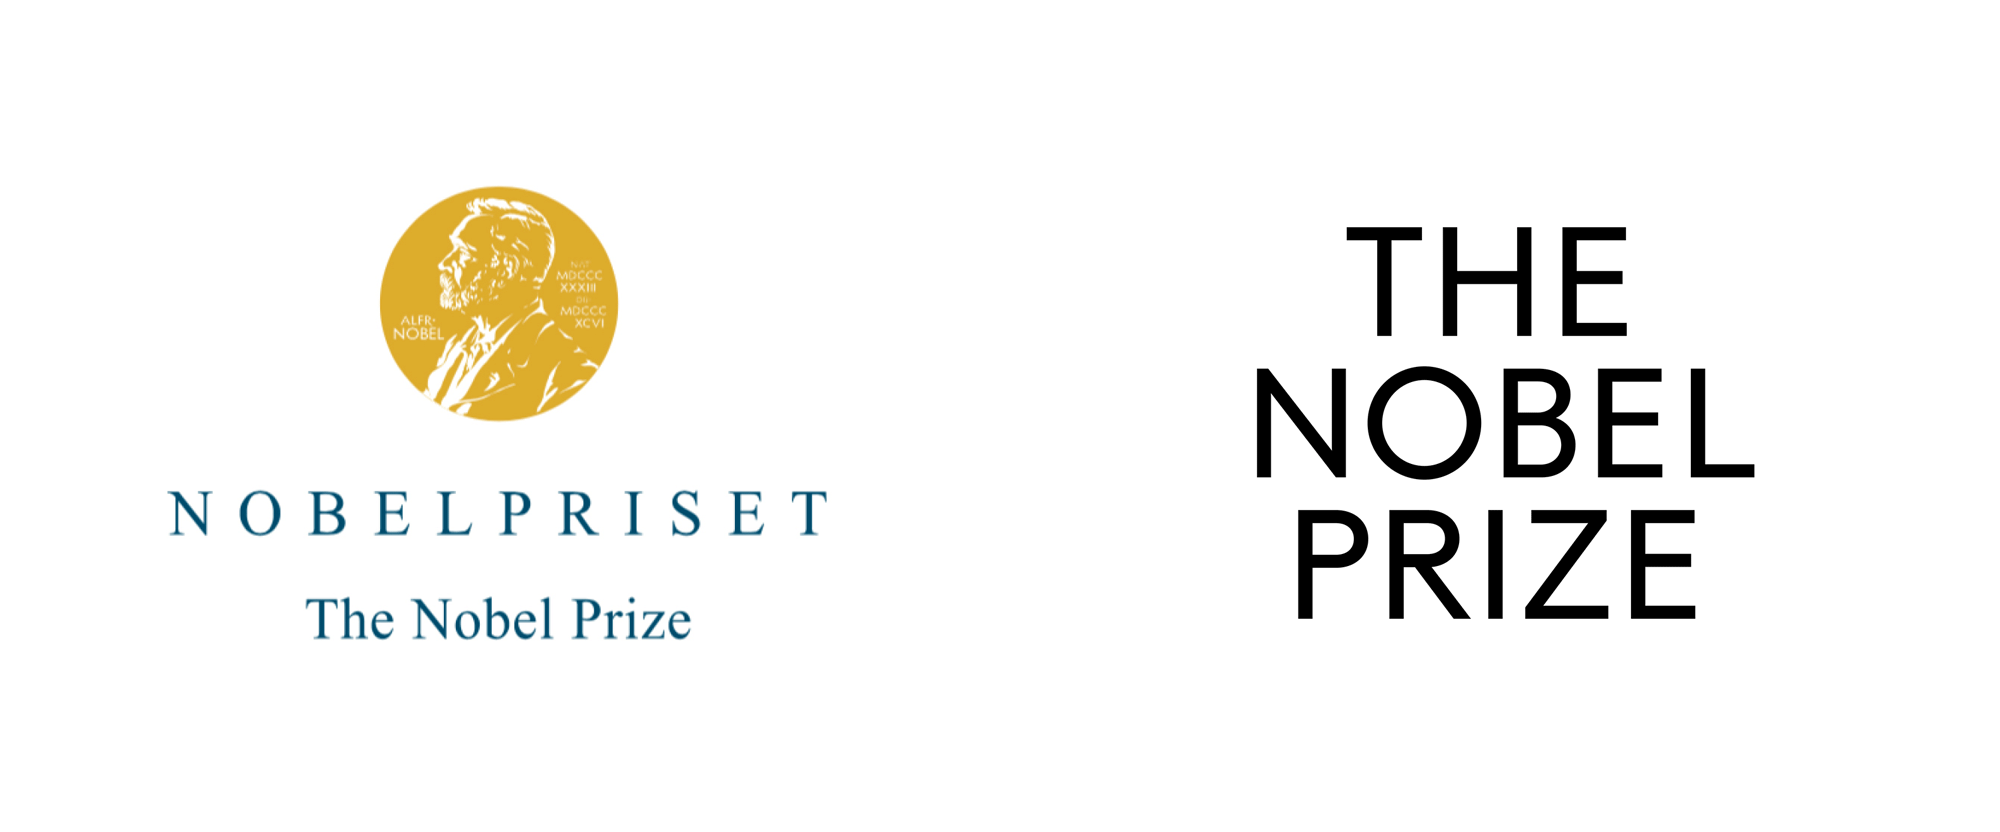 Nobel Logo - Brand New: New Logo and Identity for The Nobel Prize by Stockholm ...